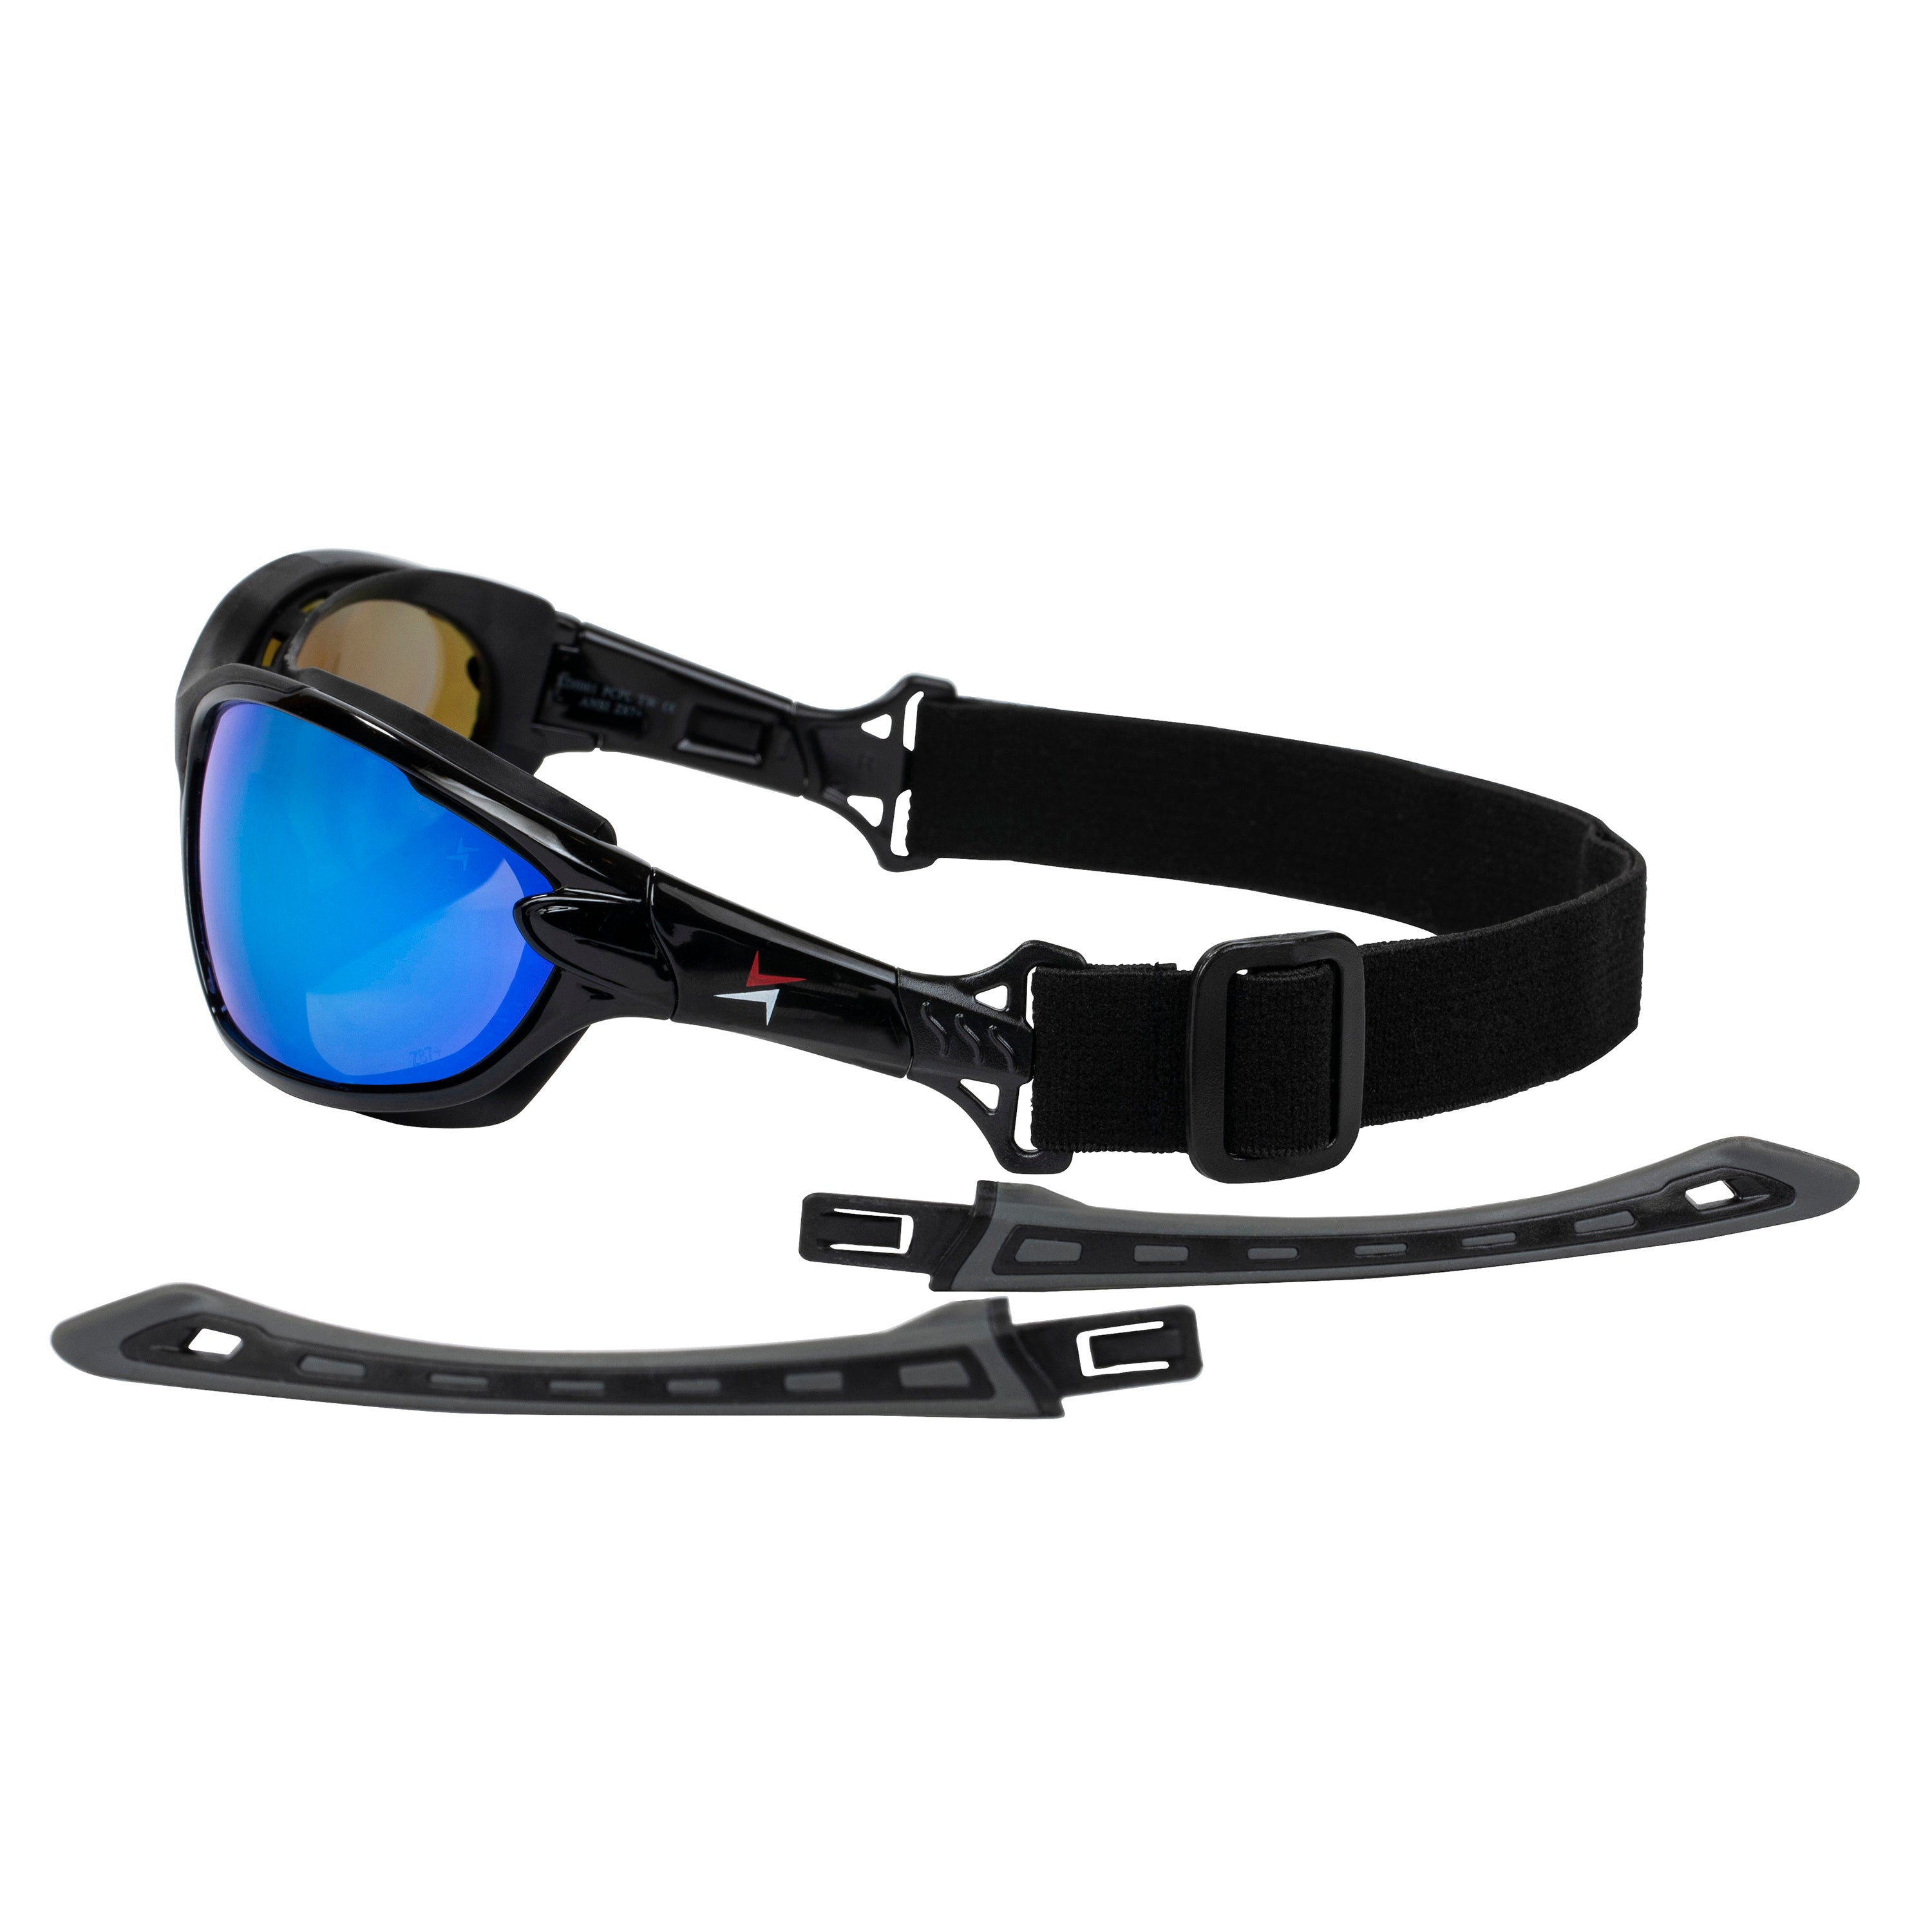 Polycarbonate Polarized Blue Mirror Lens Sport Safety Sunglasses with Swappable Strap and Gasketed Goggle Padding.